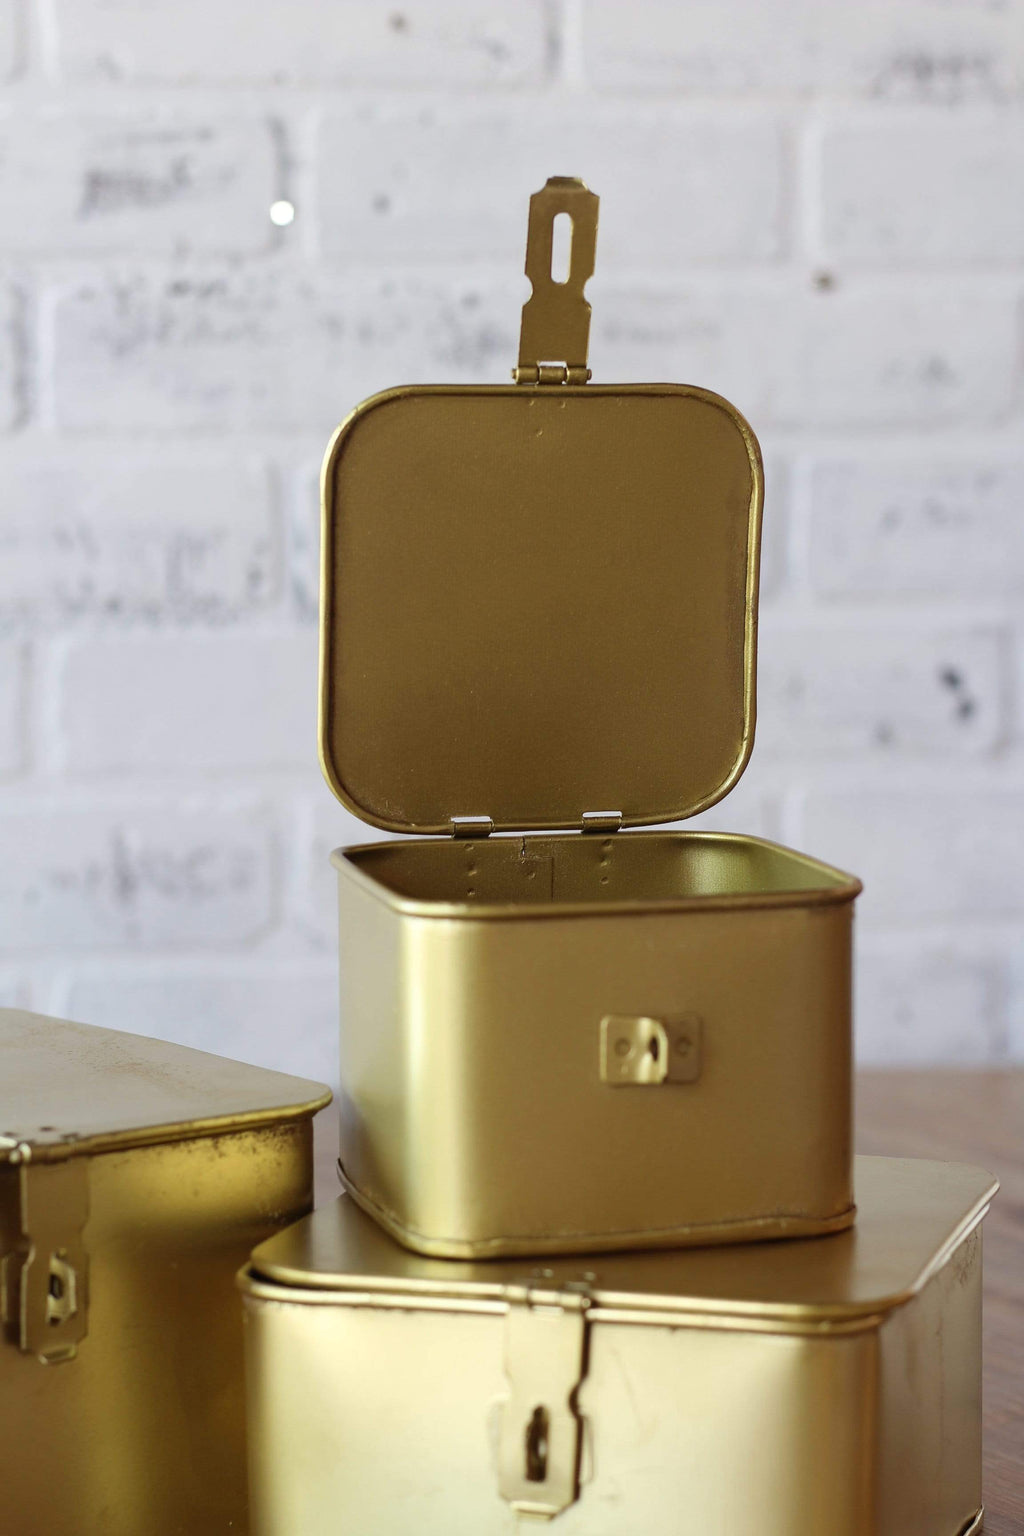 4.5 Square Brass Box – The Address for Home Interiors